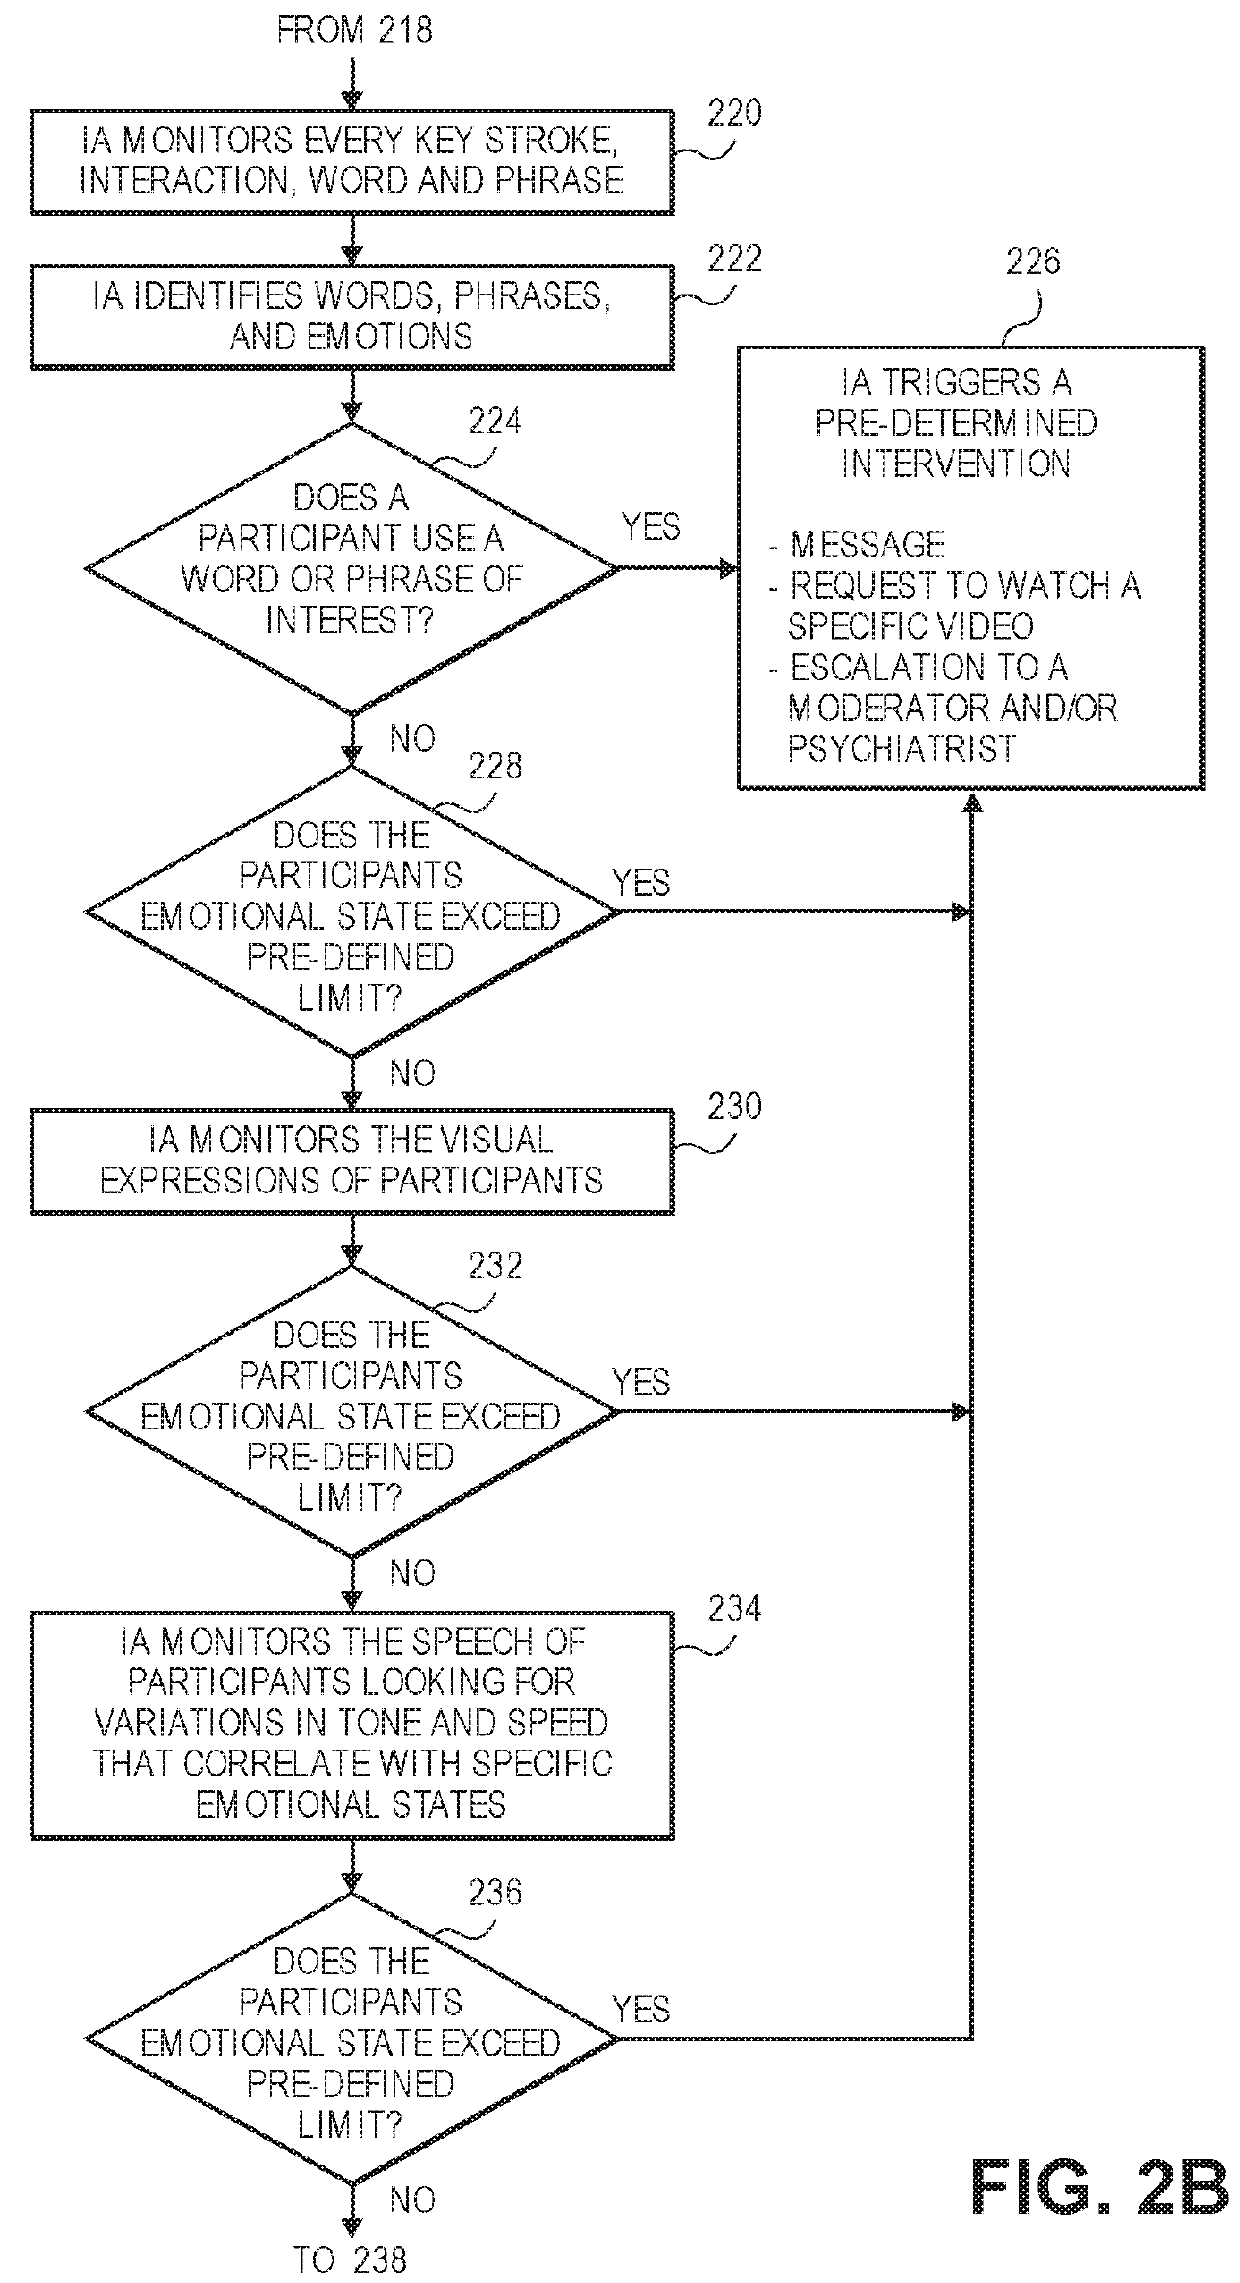 Secure database systems and methods for delivering health care treatment